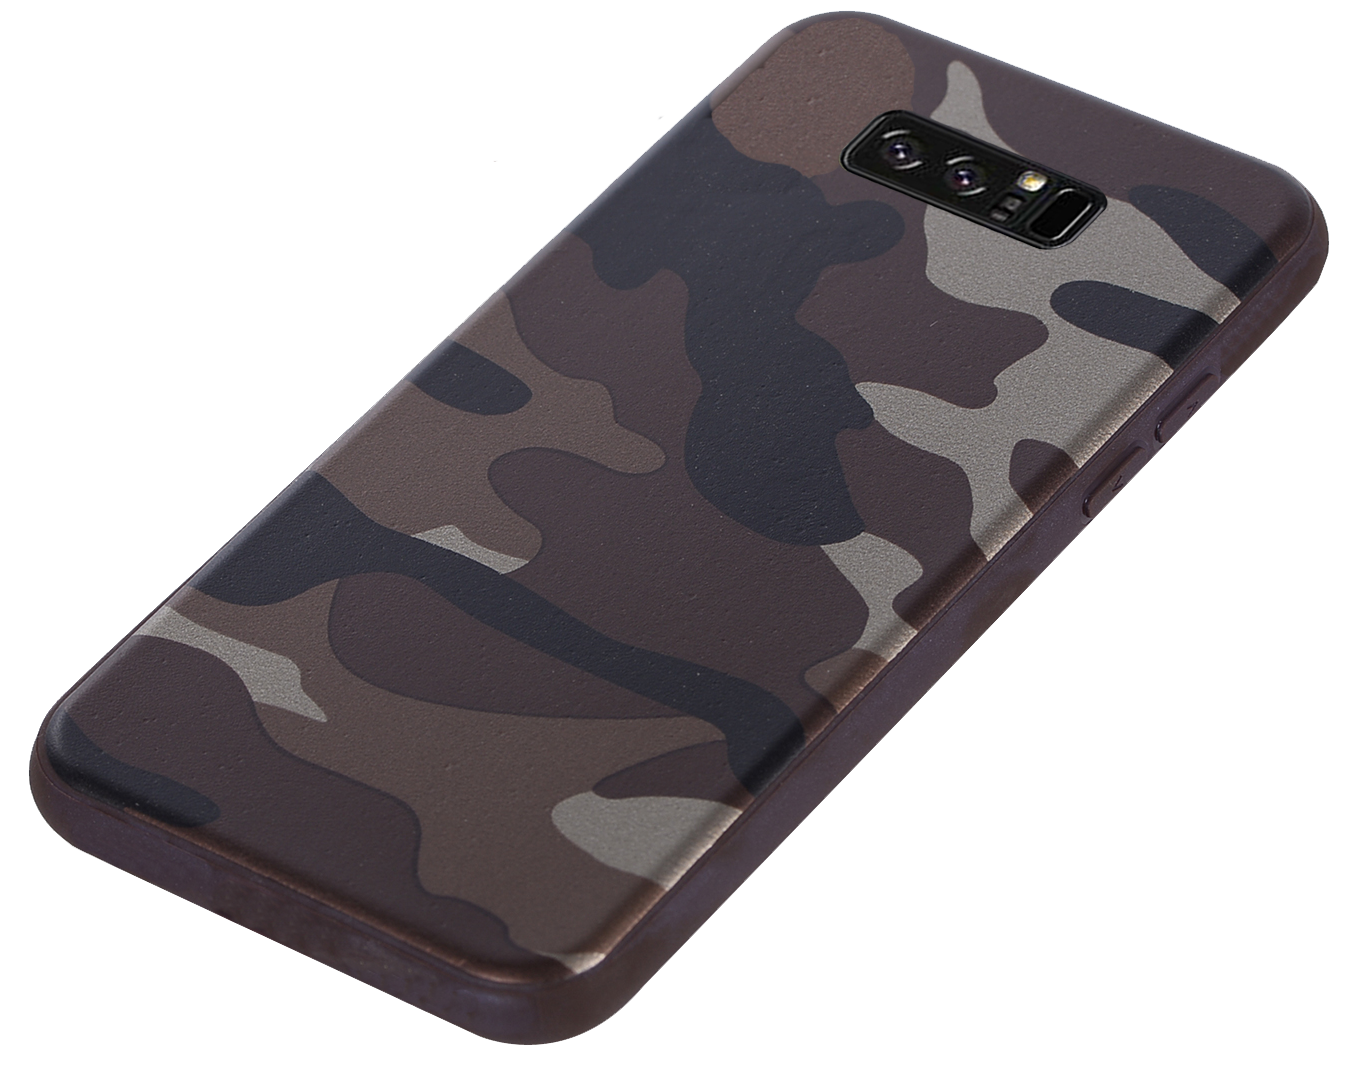 Excelsior Premium Military Design Silicon Back Cover Case for Samsung Galaxy Note 8